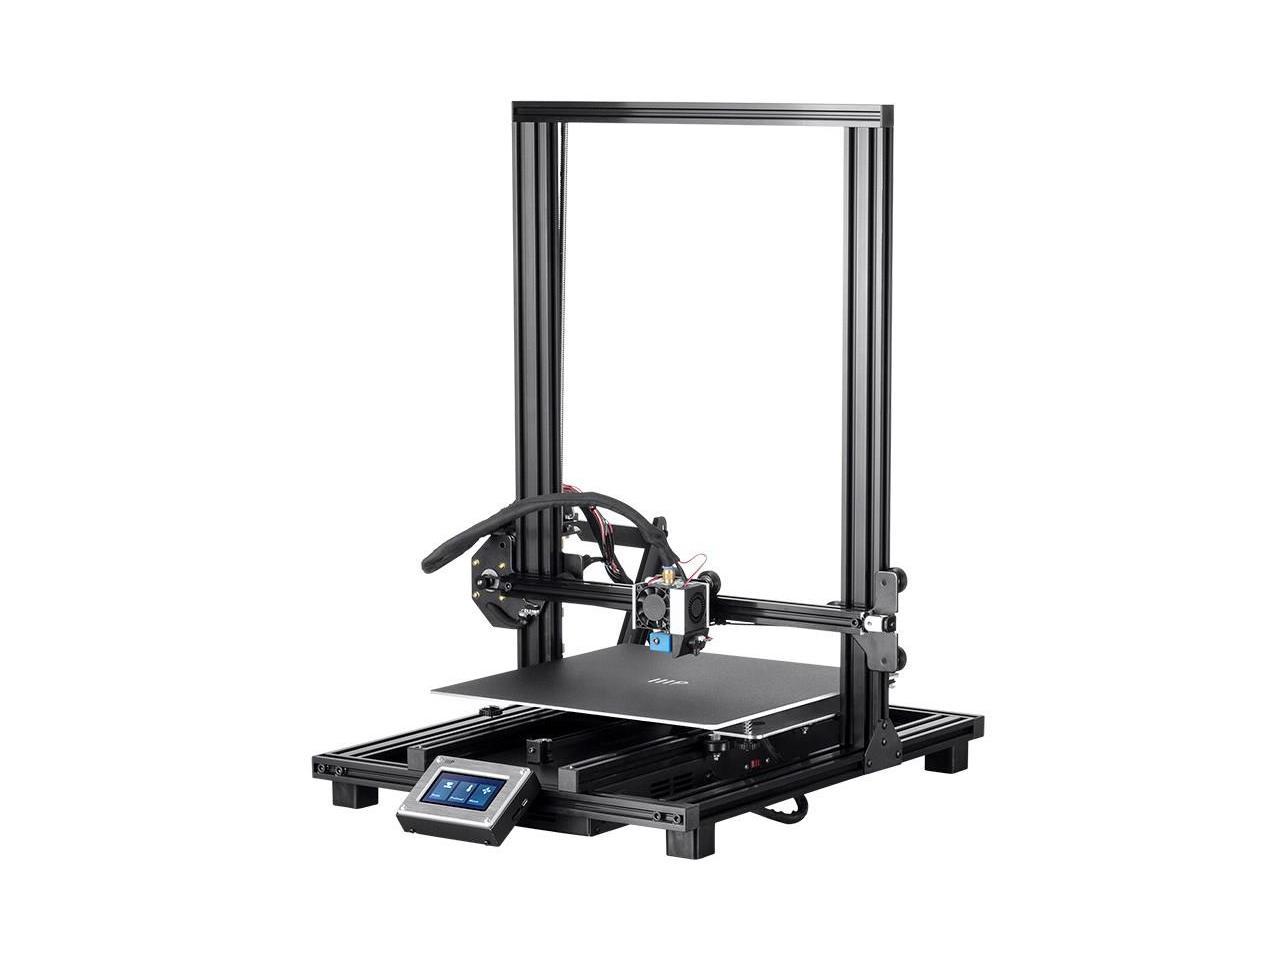 Monoprice MP10 3D Printer - Black with (300 x 300 mm) Magnetic Heated Build Plate, Resume Printing Function, Assisted Leveling, and Touch Screen